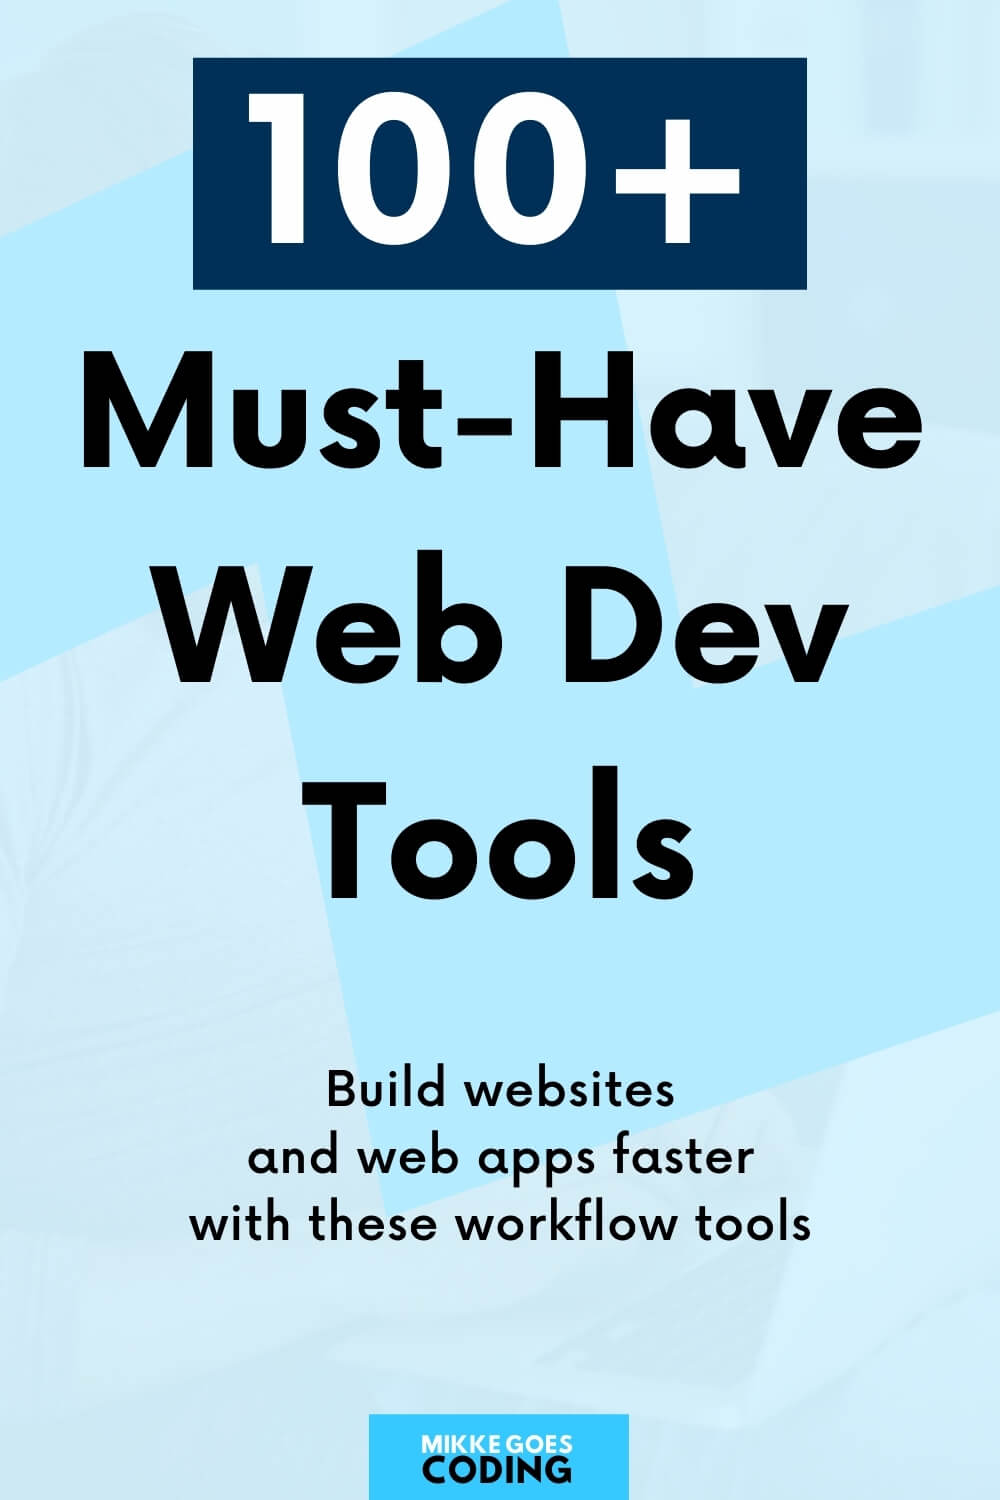 The best web development tools and web design resources